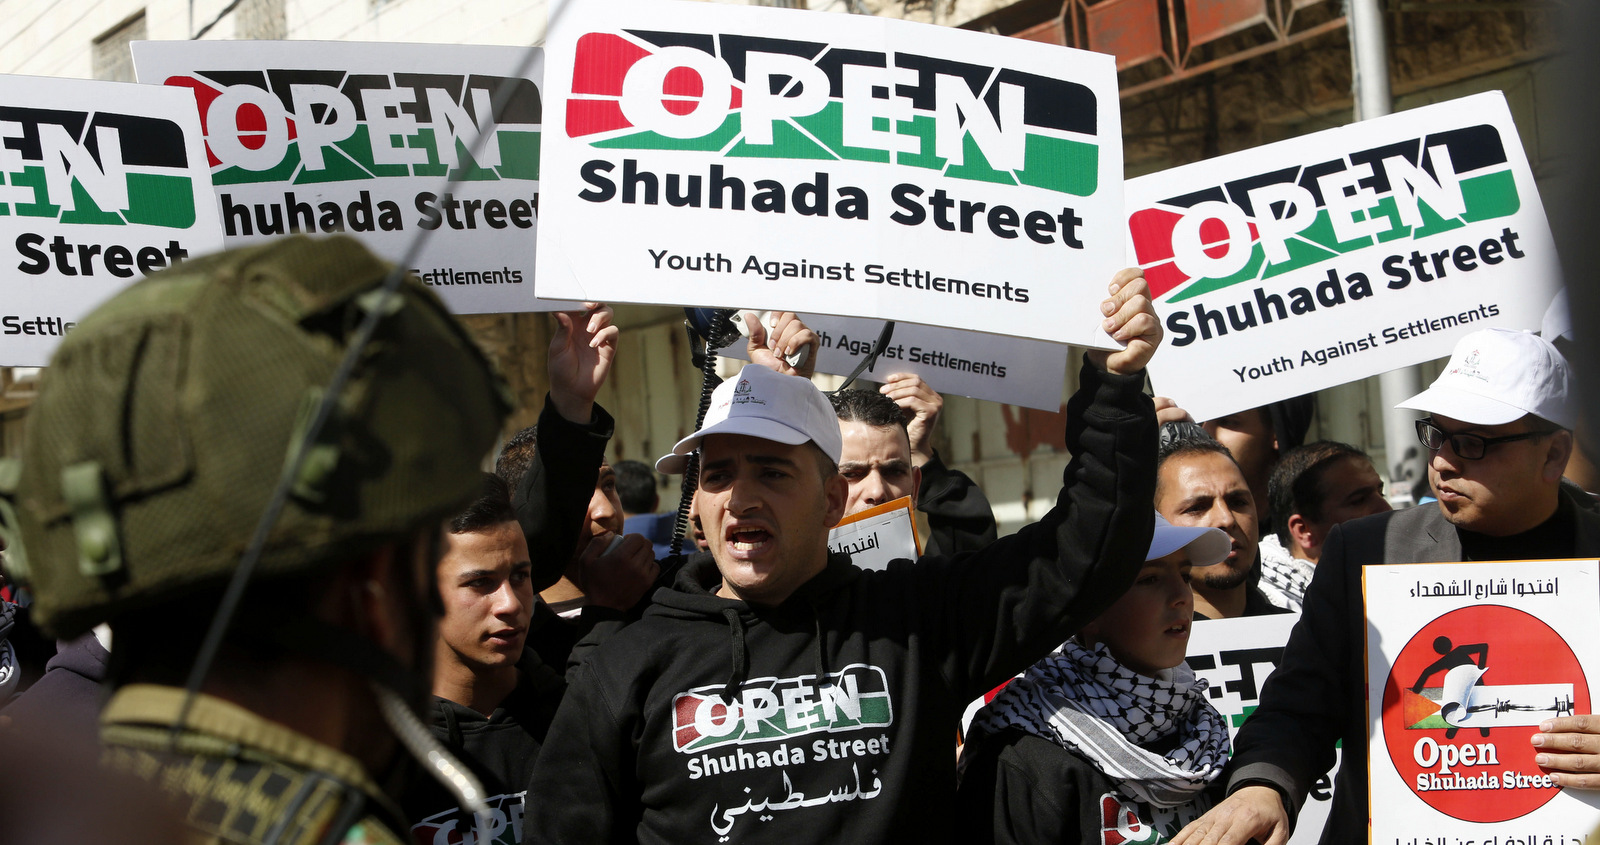 Protesters hold posters demanding the reopening of Shuhada Street in Hebron, Friday, Feb. 27, 2015. Israel closed Shuhada Street for Palestinians in 1994 after an Israeli killed 29 Palestinians and wounded over a 100 praying in a mosque. (AP/Nasser Shiyoukhi)